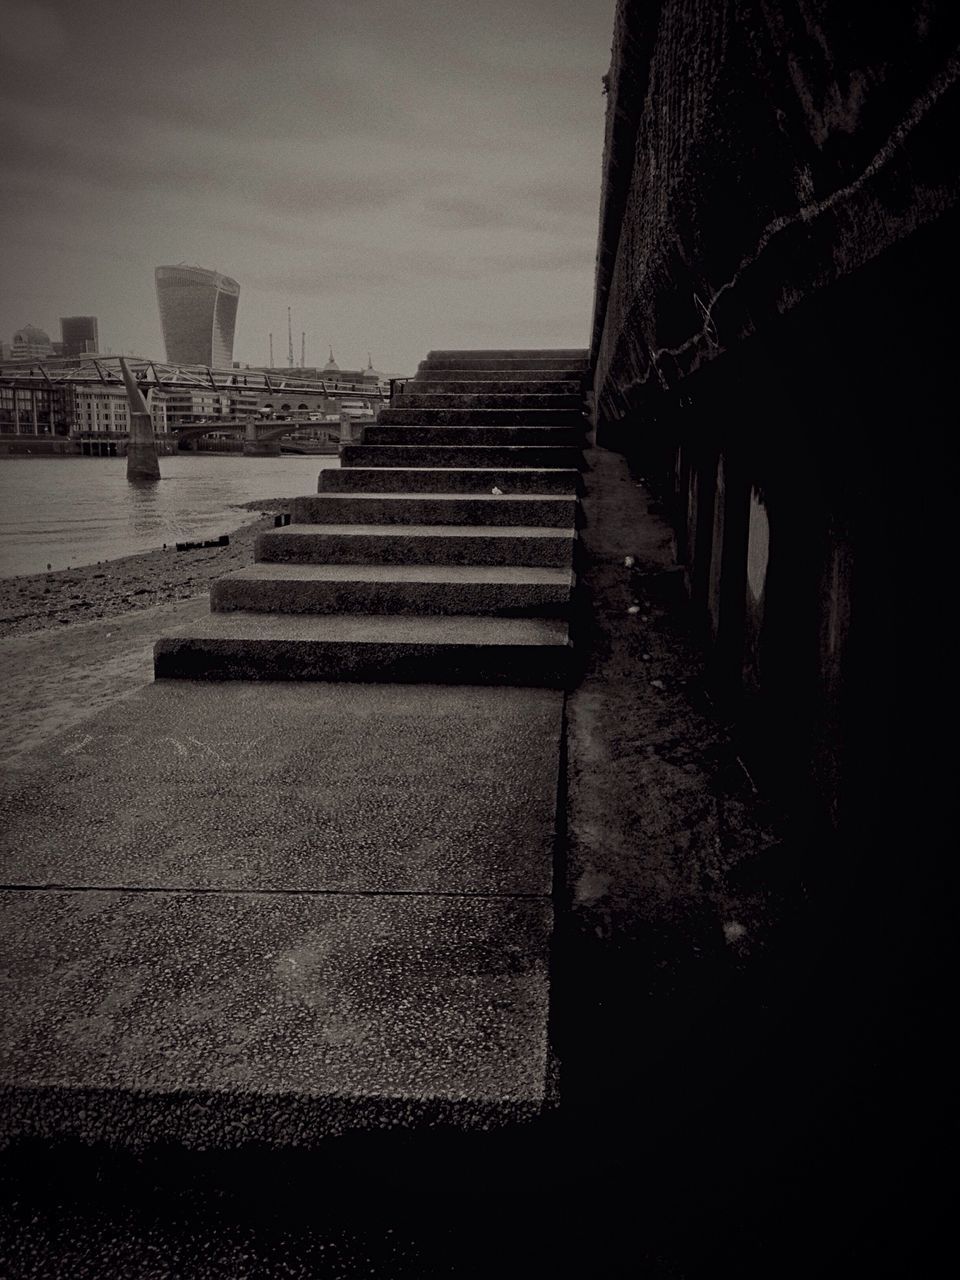 architecture, built structure, building exterior, water, sky, steps, city, sea, outdoors, building, day, shadow, no people, sunlight, travel destinations, staircase, dusk, steps and staircases, the way forward, river